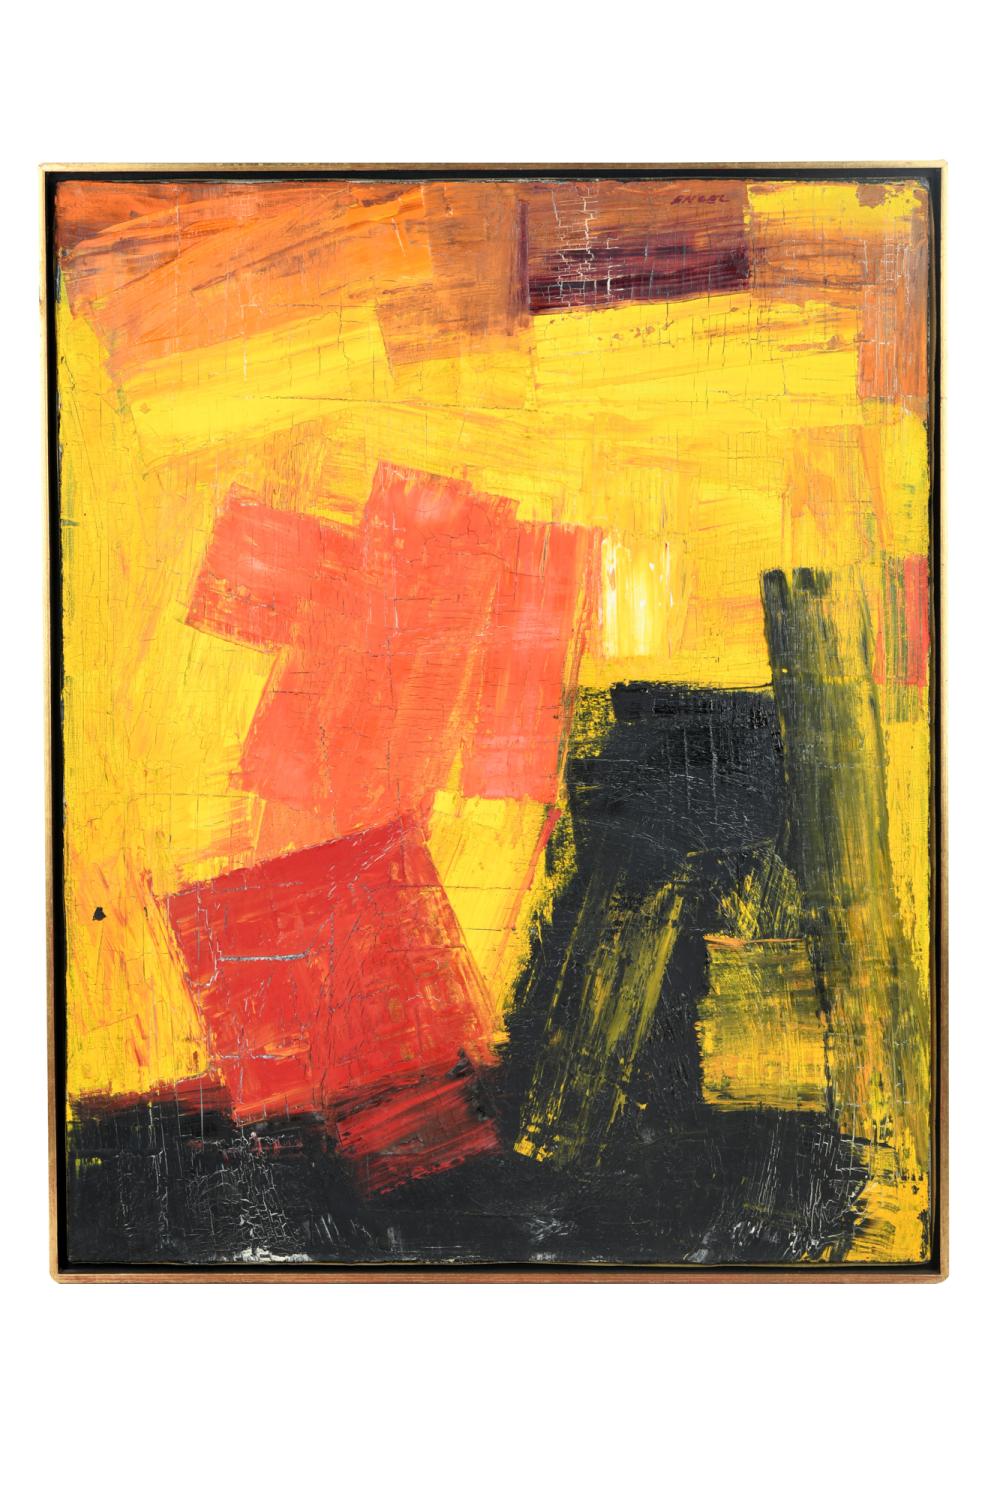 JULES ENGLE (1909-2003): ABSTRACT1961